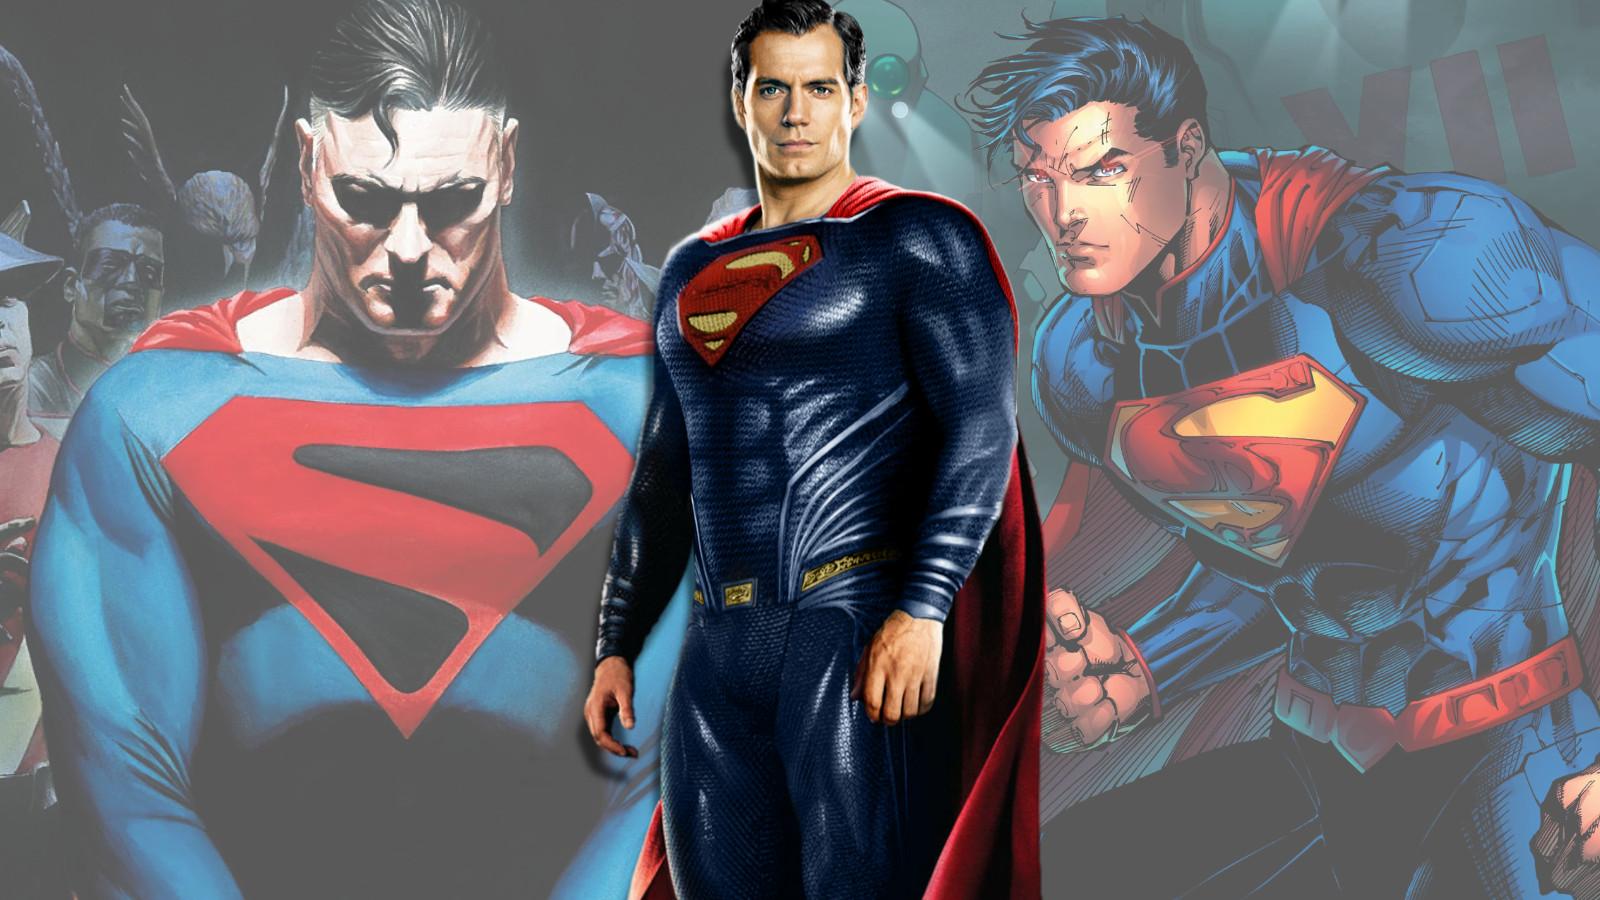 DC Comics makes the most of Superman's 75th year